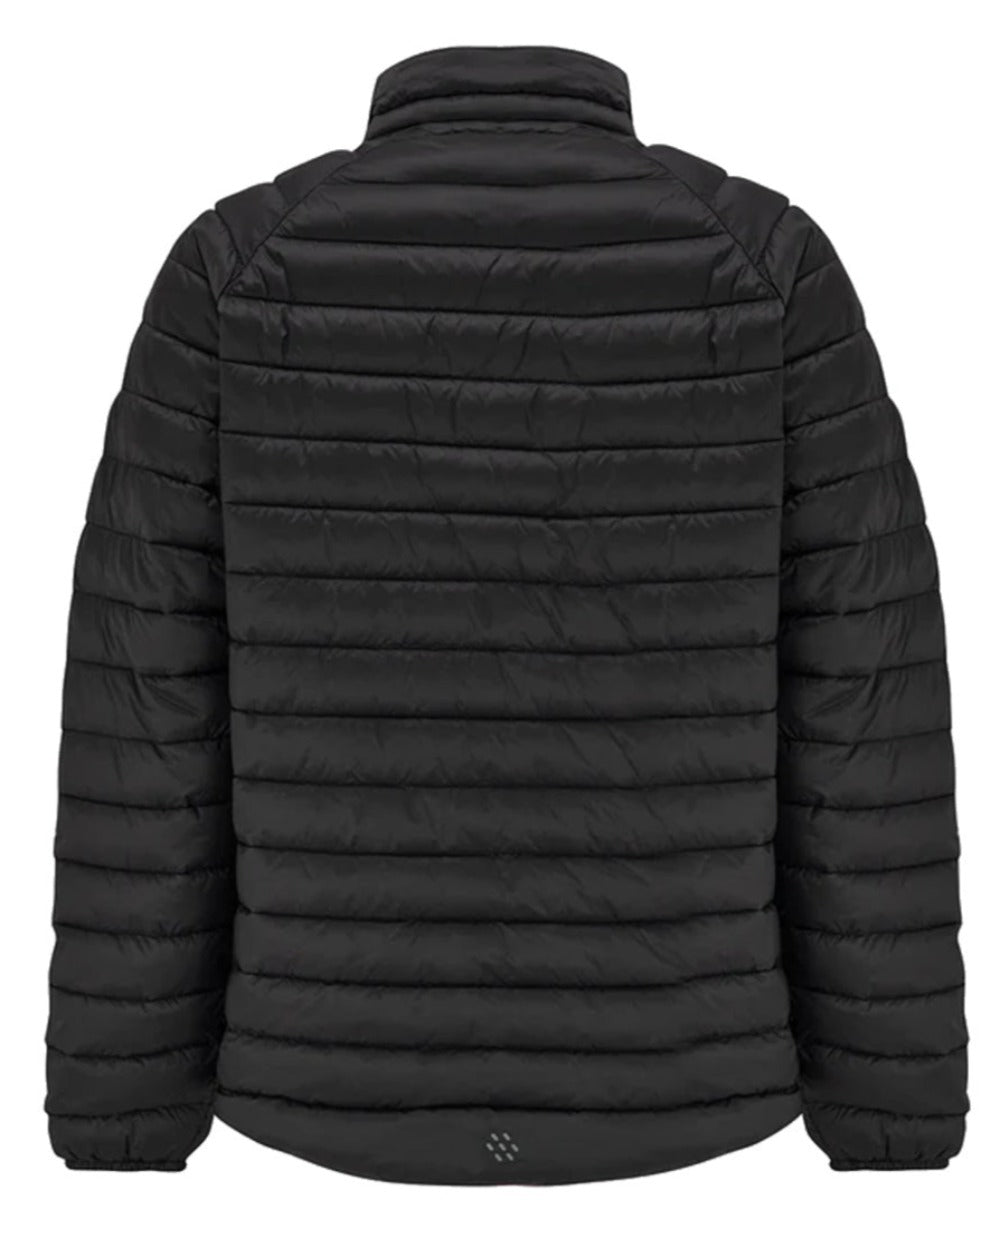 Jet Black coloured Mac In A Sac Mens Synergy Jacket on white background 